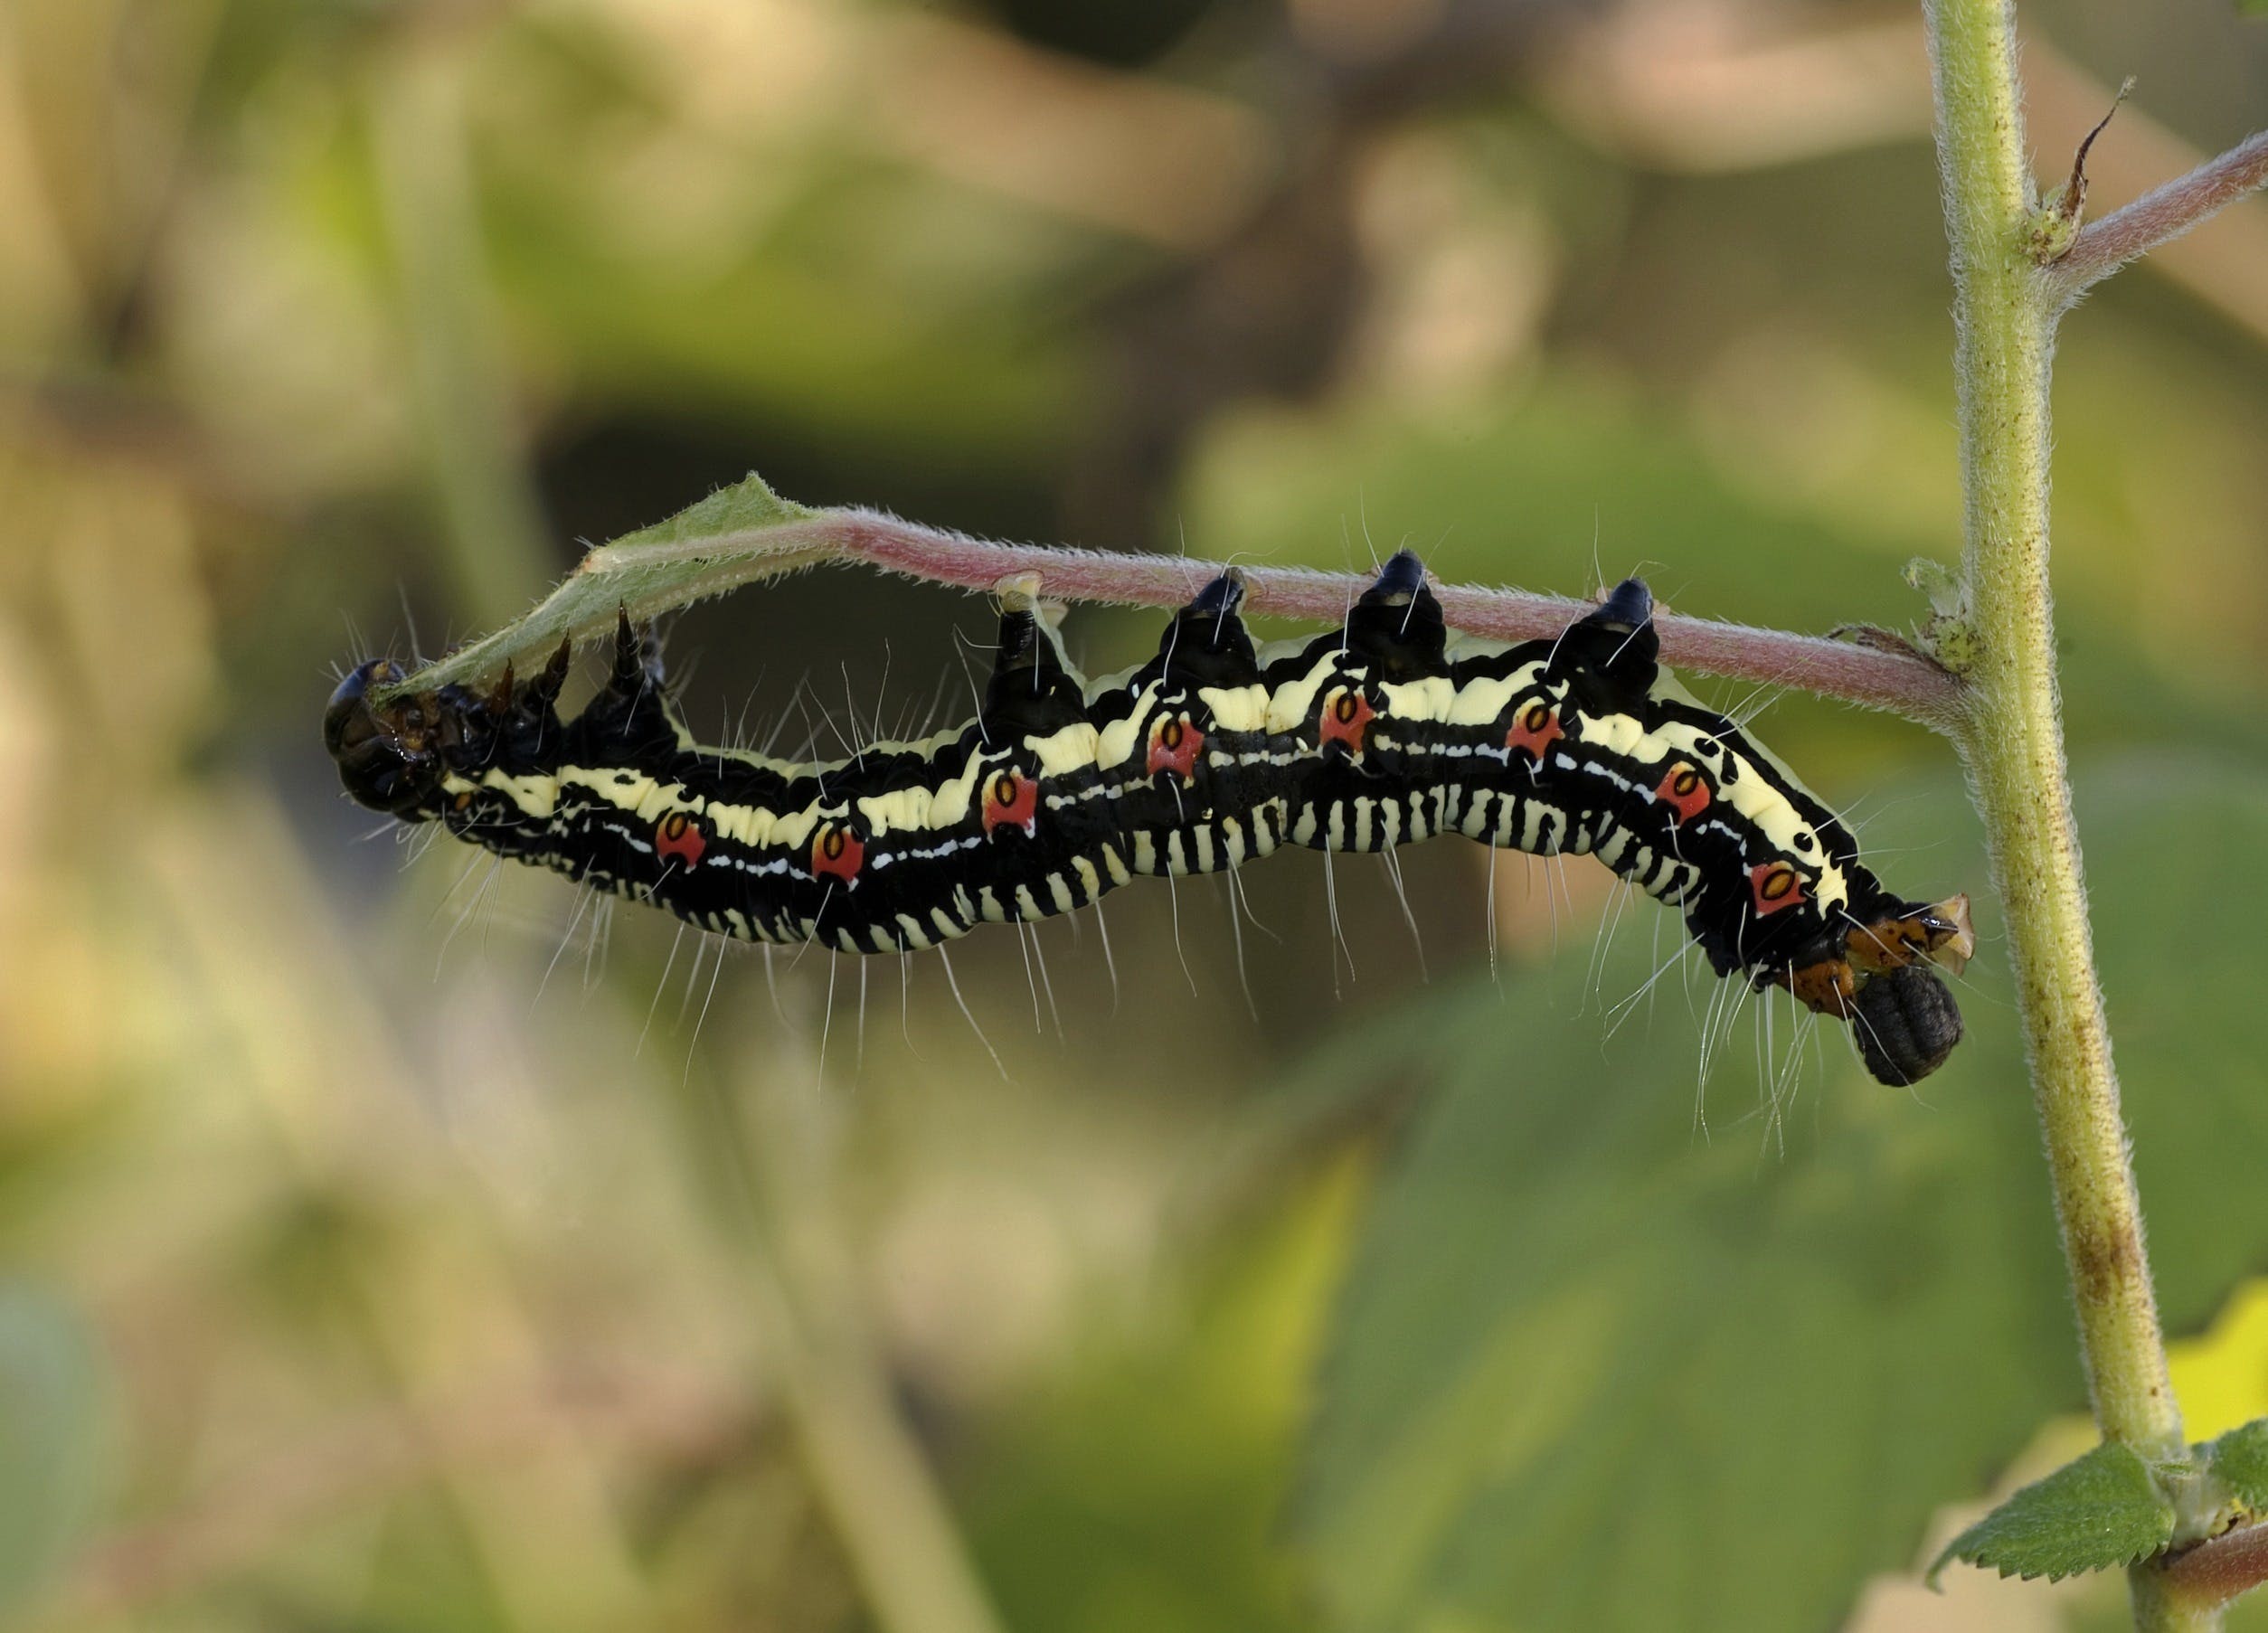 A black and yellow striped caterpillar, possibly a Trichogramma Wasp larva, crawling on a surface